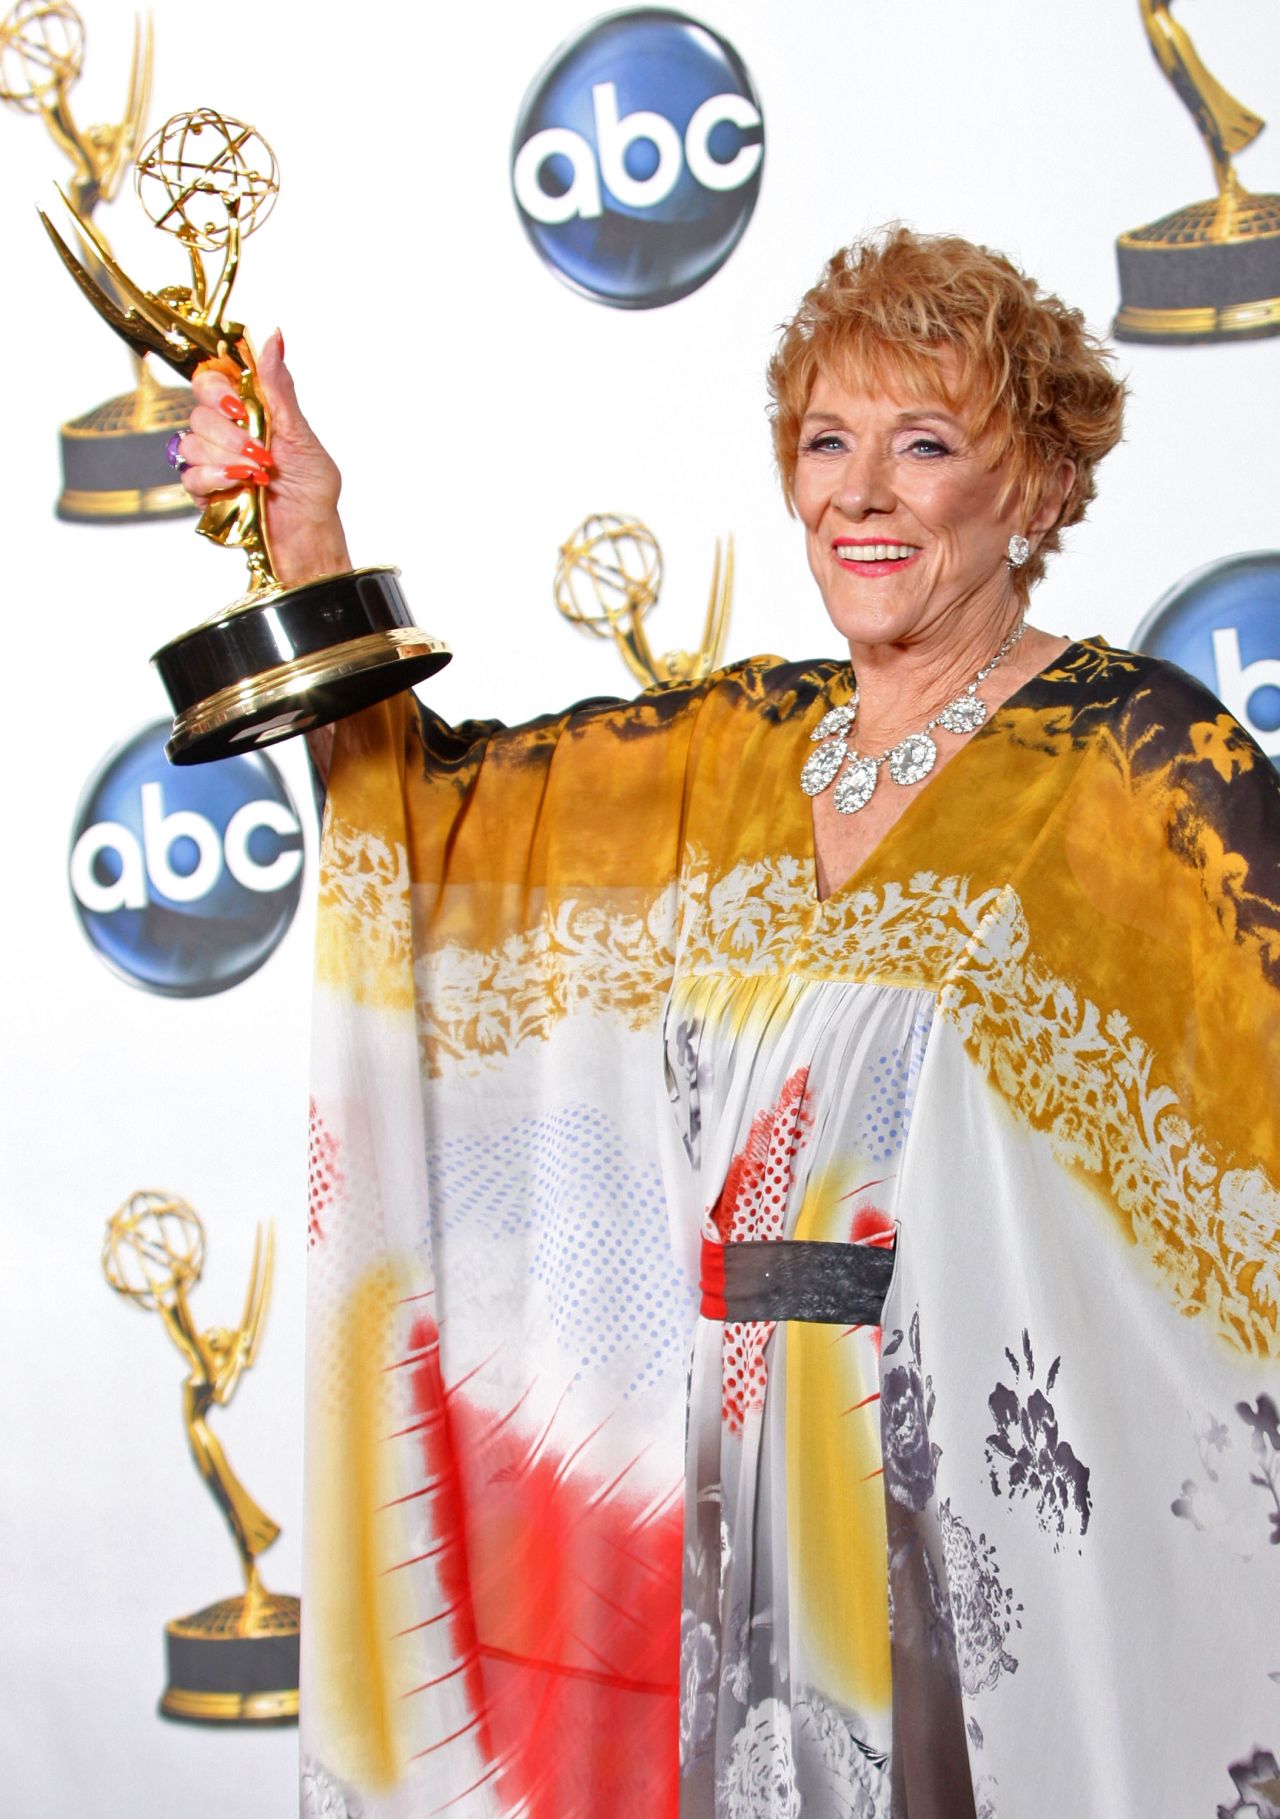 Cooper celebrates winning outstanding lead actress in a drama series for "The Young and the Restless" during the 35th Annual Daytime Emmy Awards held June 20, 2008, in Hollywood.  